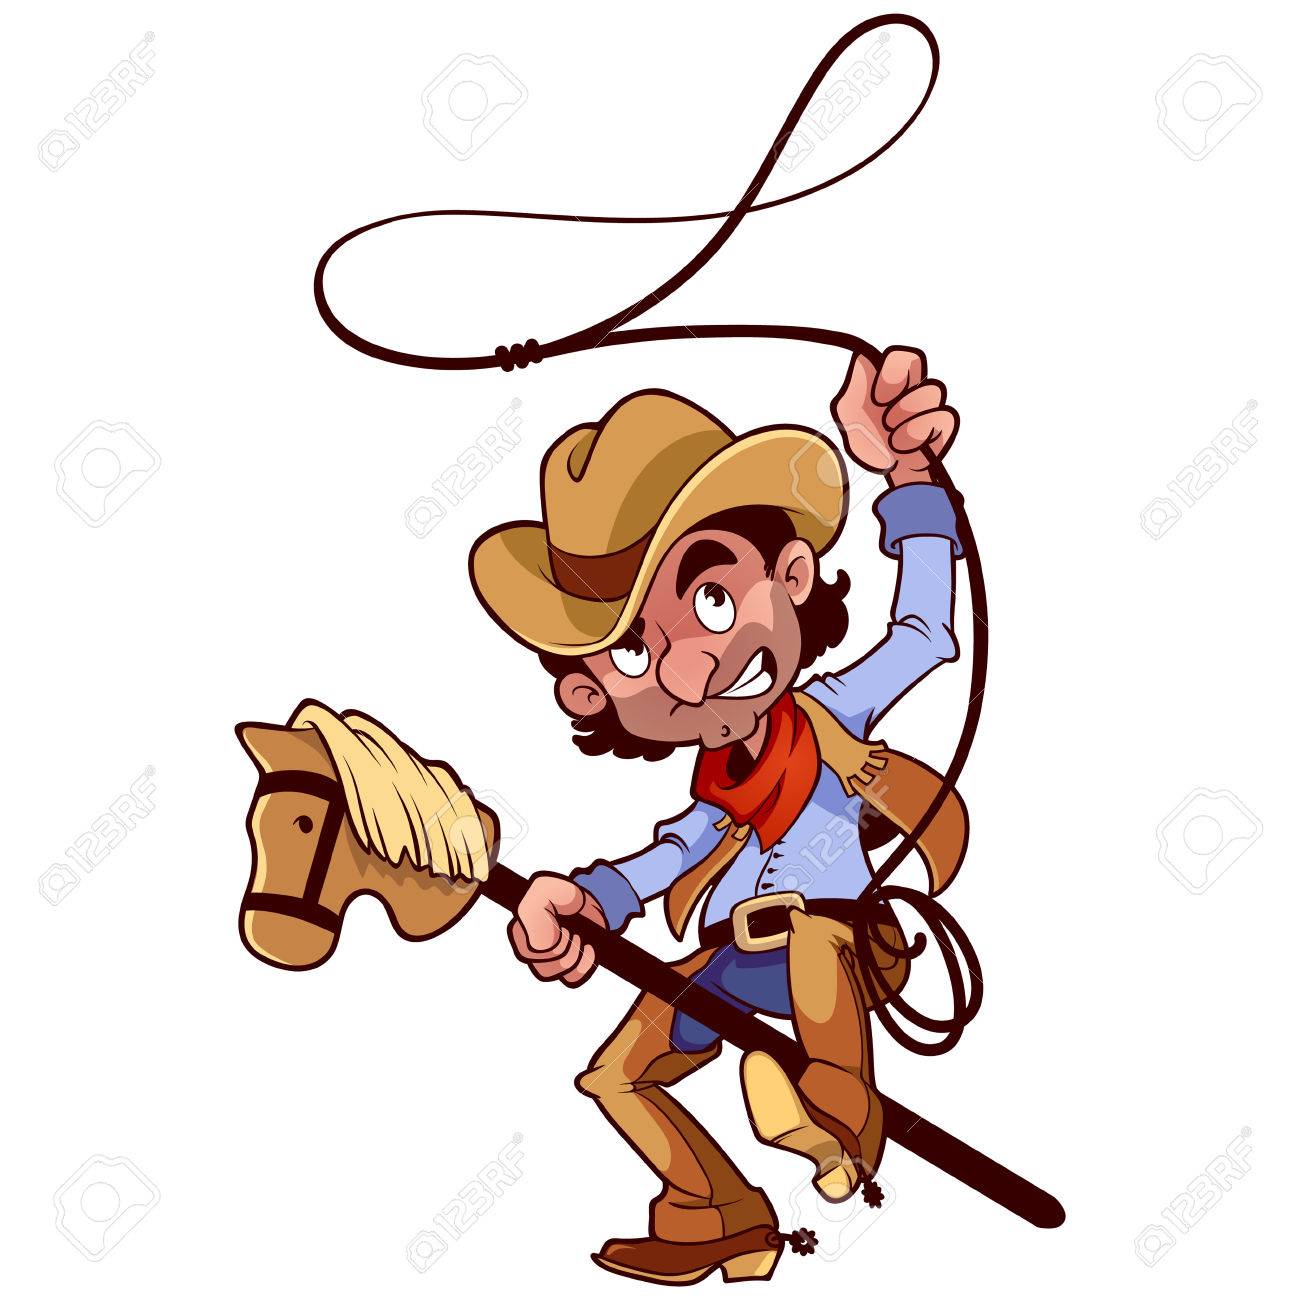 Free Cowboy Clipart stick figure, Download Free Clip Art on